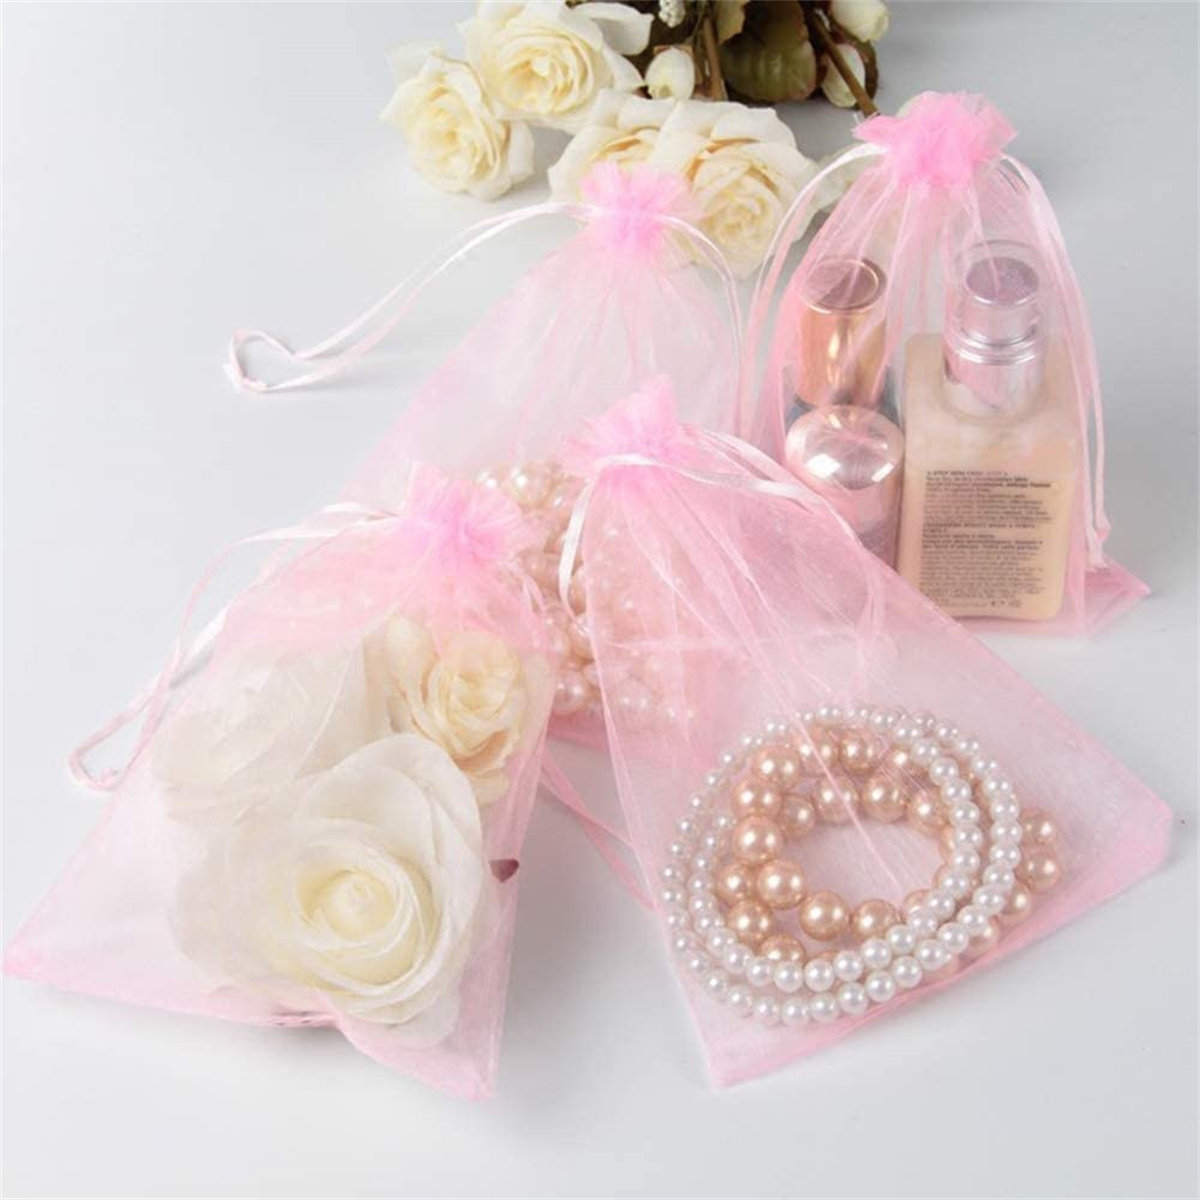 Free Ship 50Pcs Organza Jewelry Packing Pouch Wedding Favor Rose Gift Bags Hot 